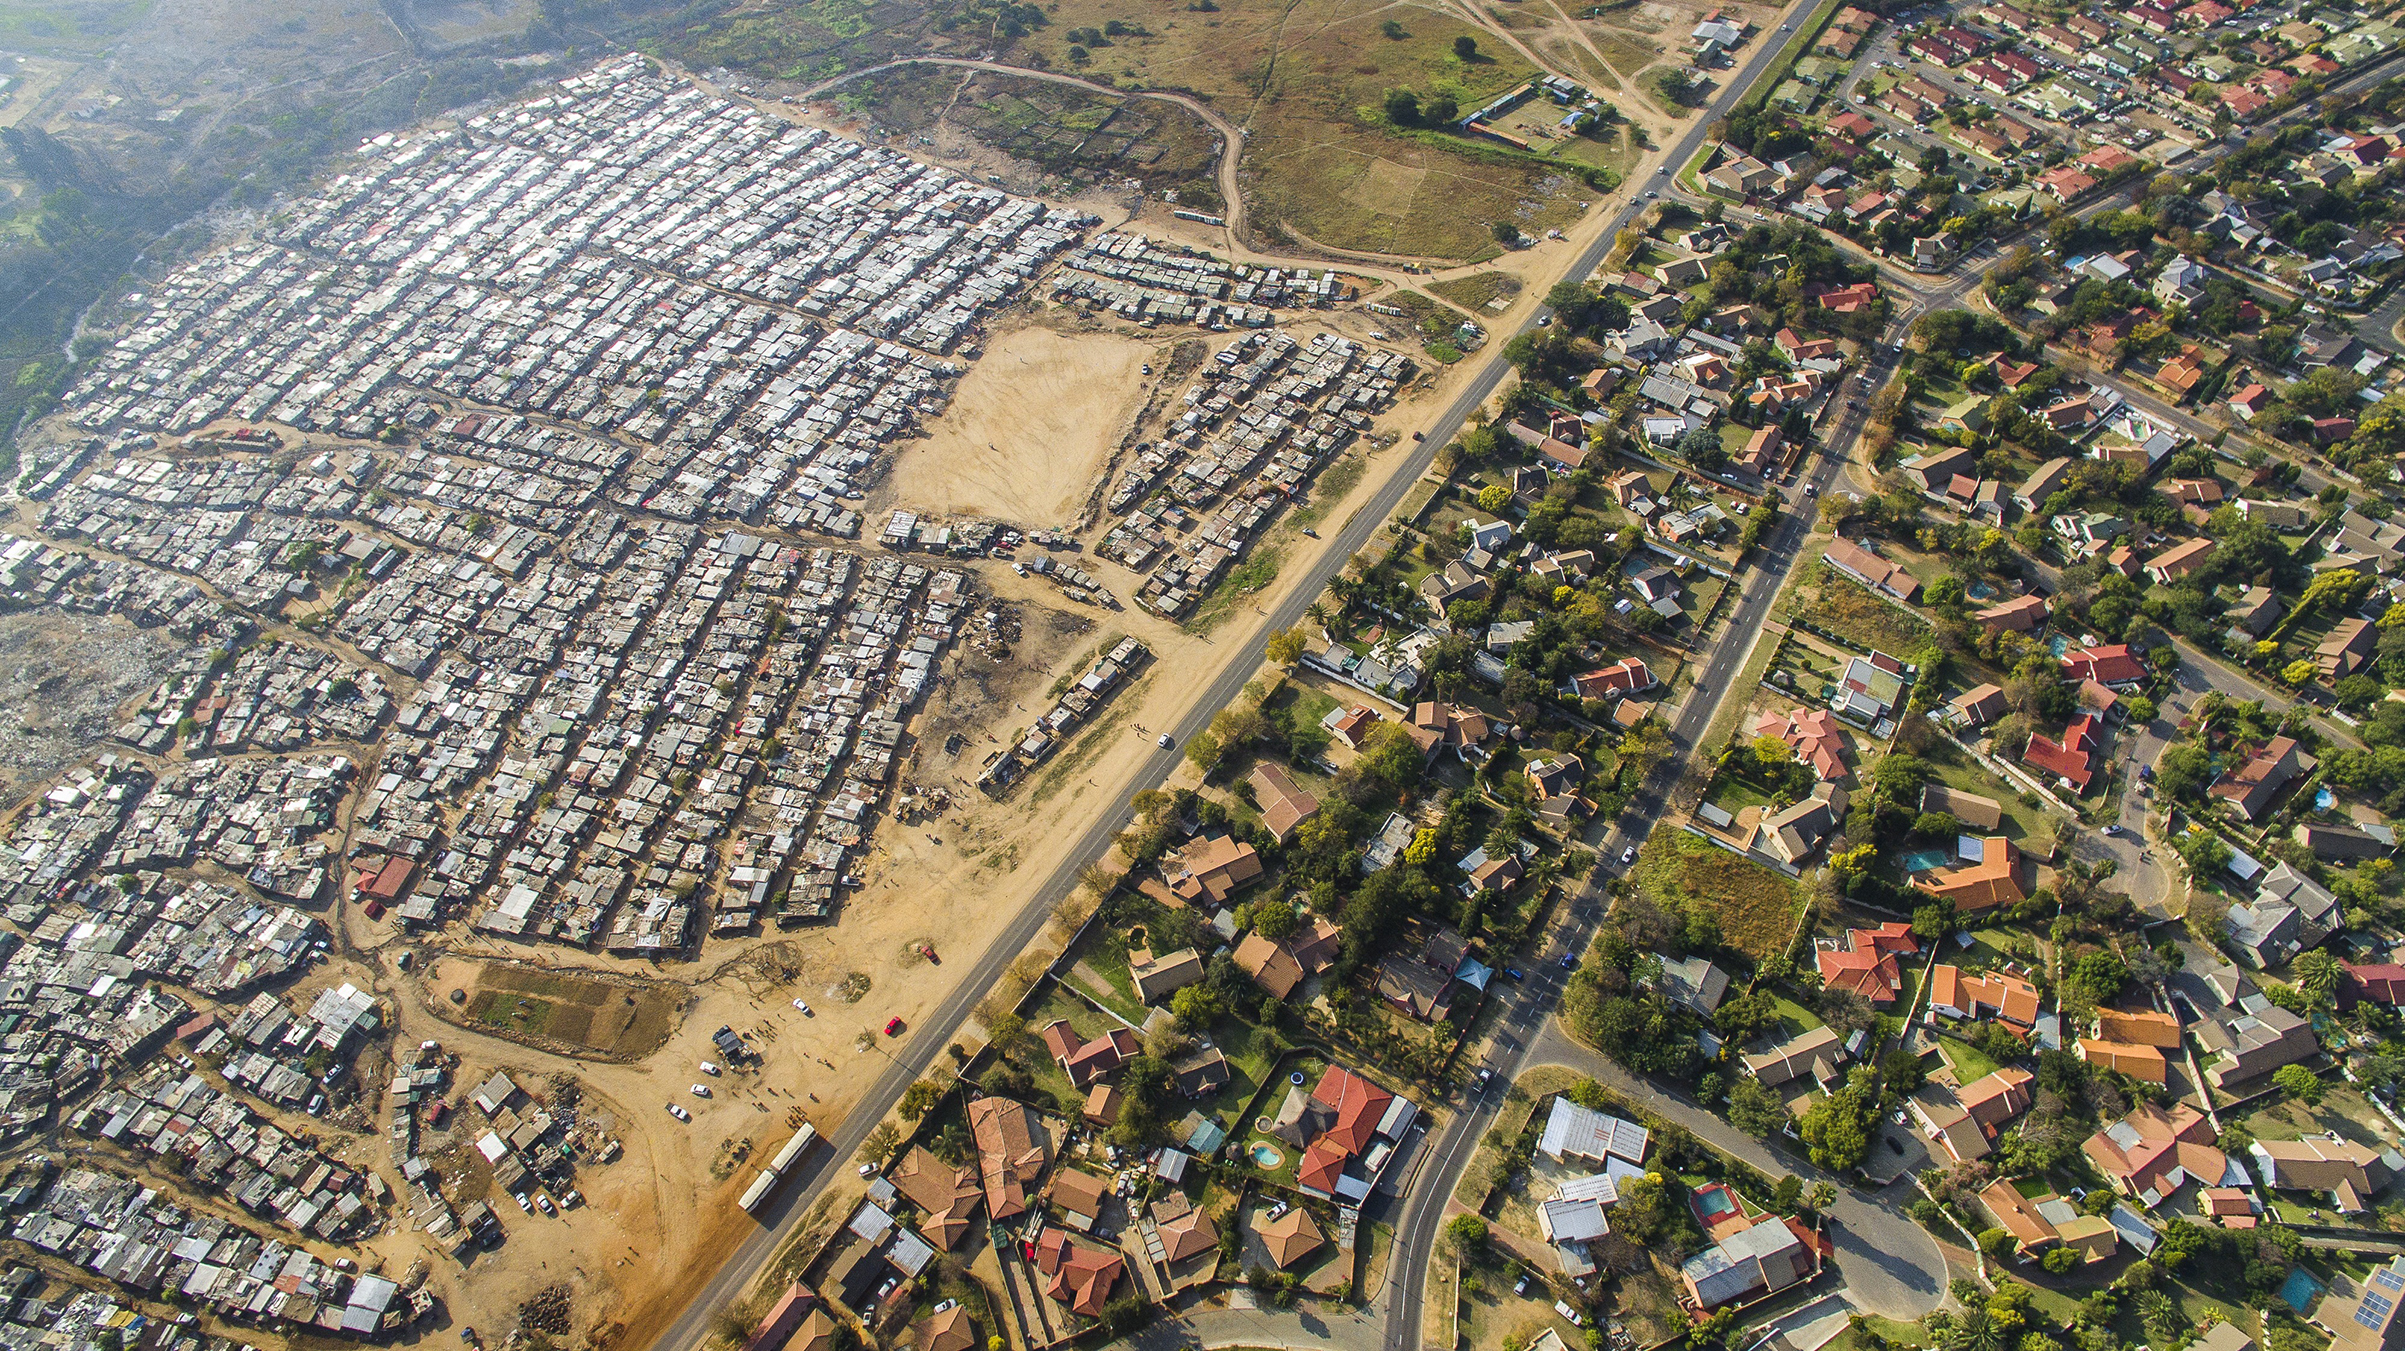 Inequality is found around the globe, but the World Bank says South Africa qualifies as the starkest example. For a vivid perspective on it, Johnny Miller of the Unequal Scenes Project sent a drone over northwest Johannesburg. On the left is Kya Sands, a shack city that is home to many economic migrants who arrived from other African nations. Across the road is Bloubusrand, a middle-class suburb known for its diverse mix of residents. (Johnny Miller)